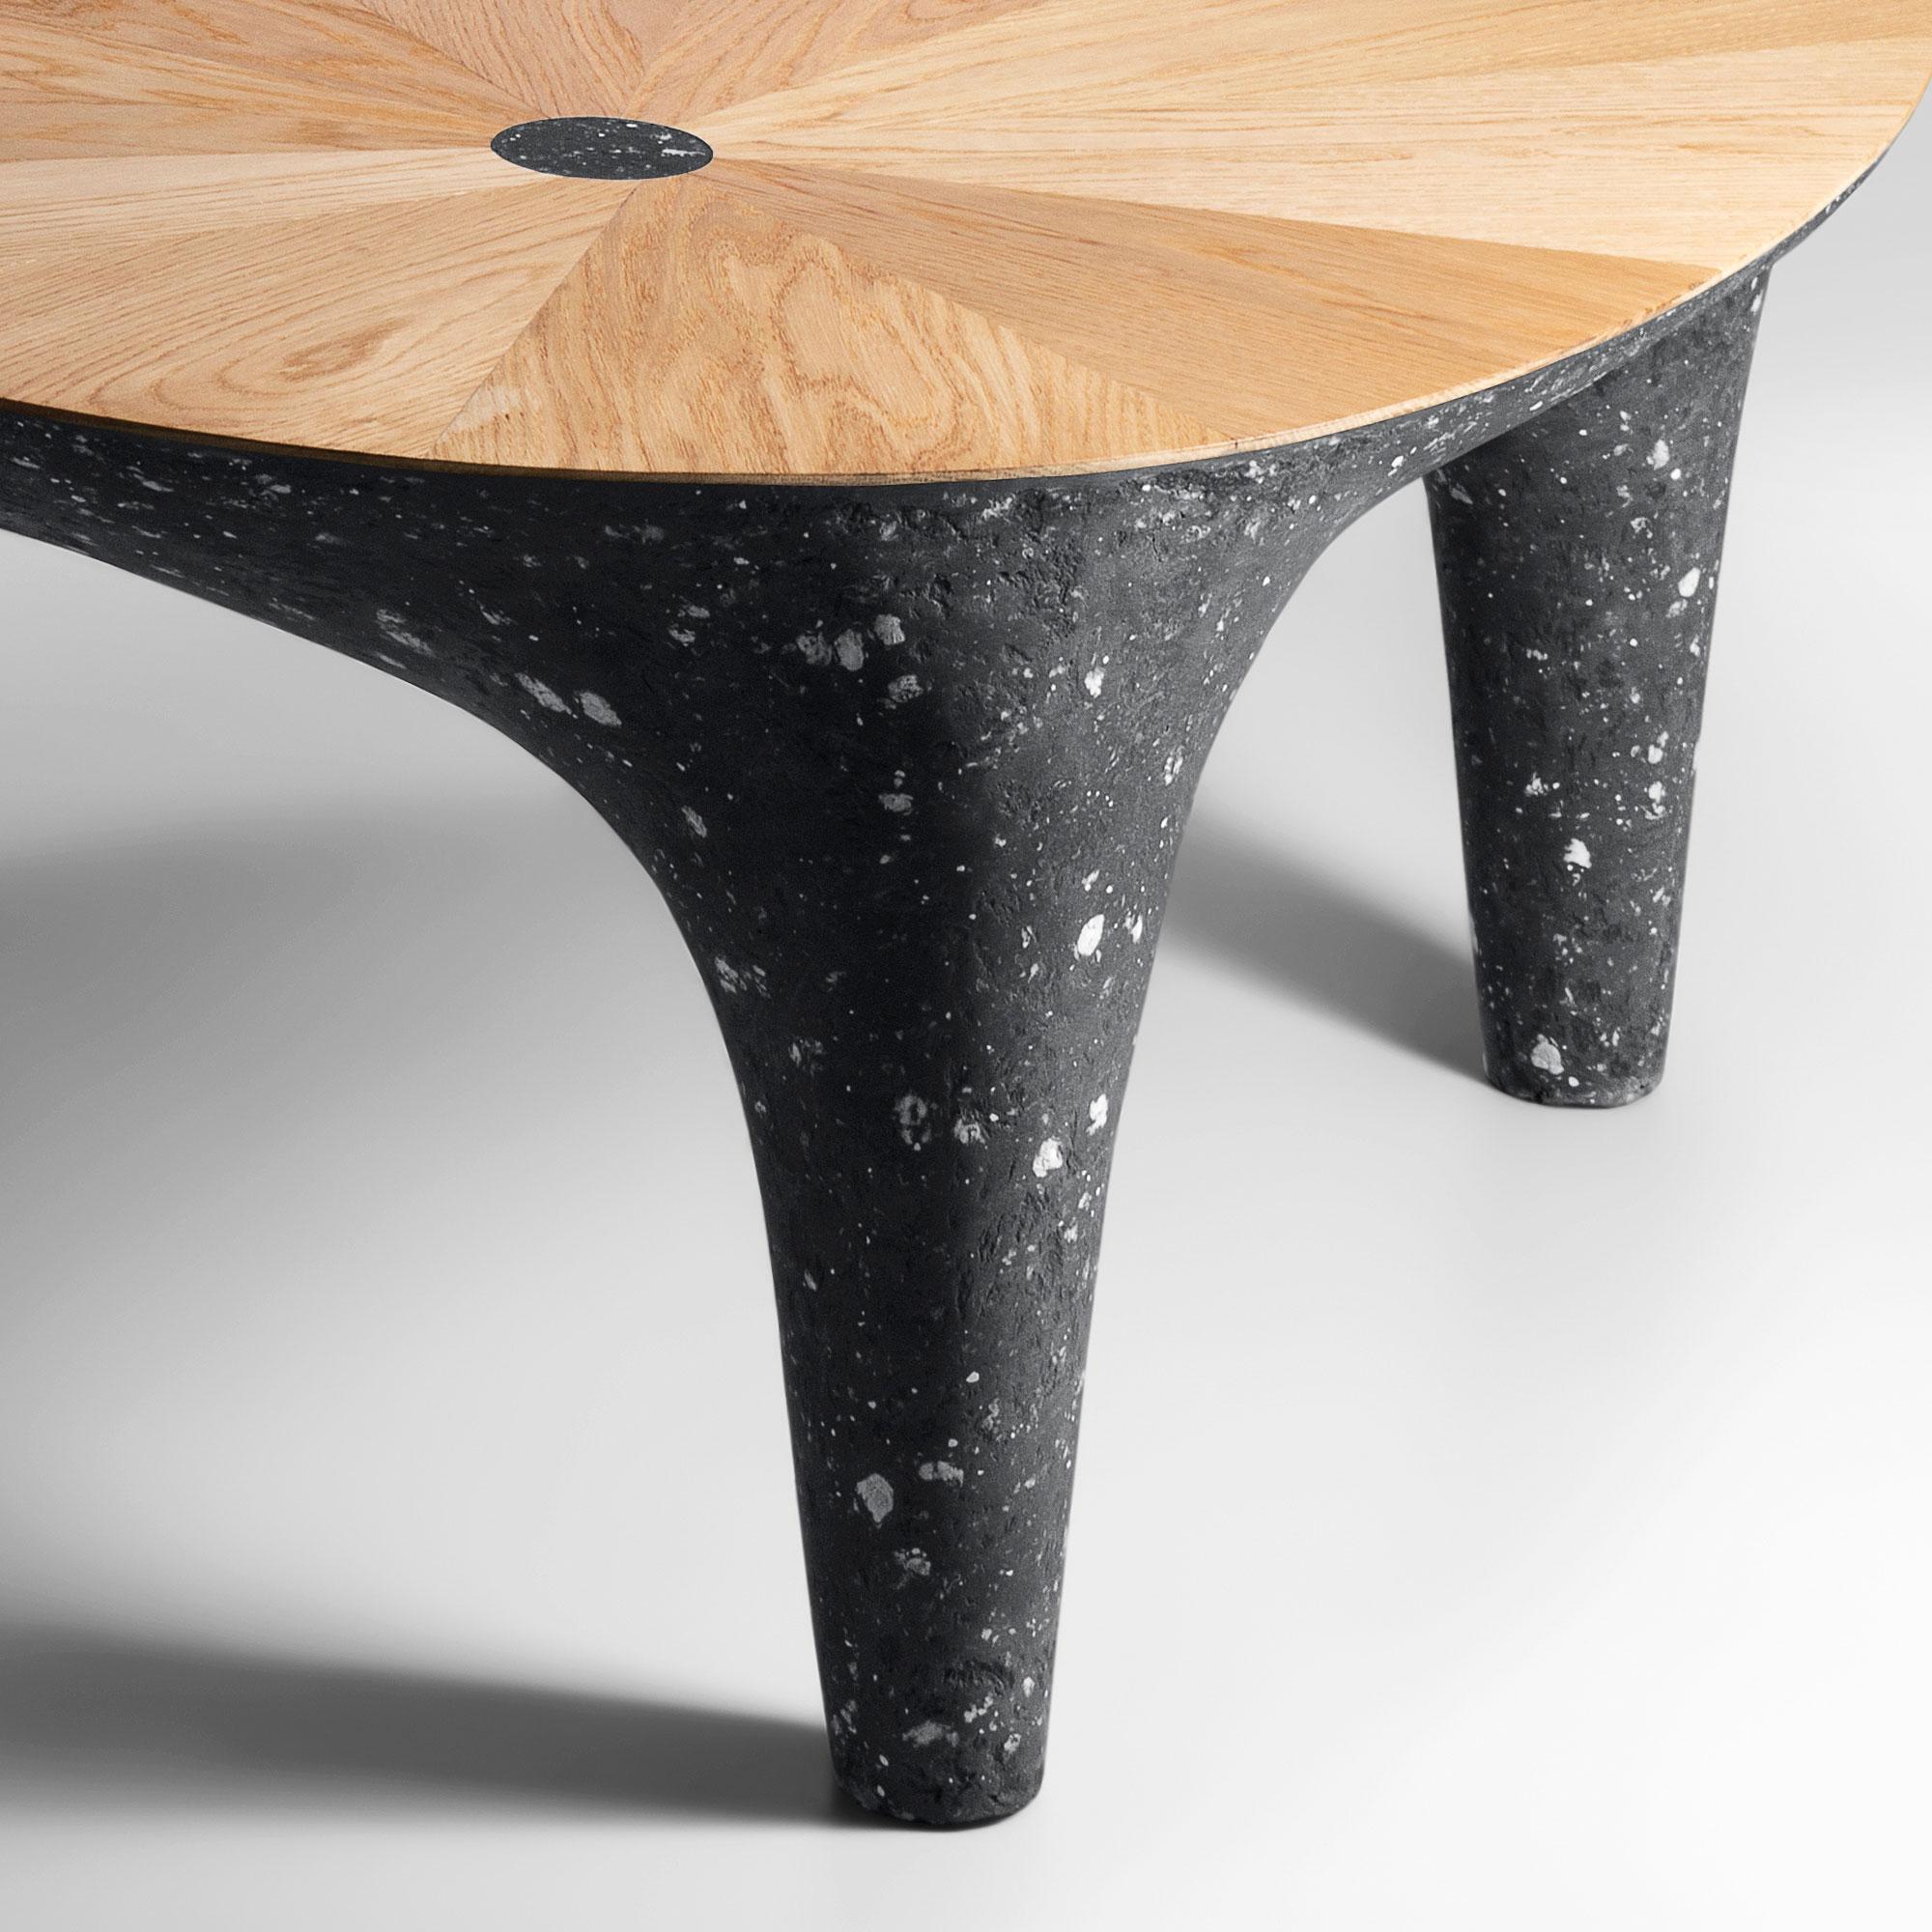 Hand-Crafted Modern Black Concrete Bench, Natural Oak Tabletop by Donatas Žukauskas For Sale